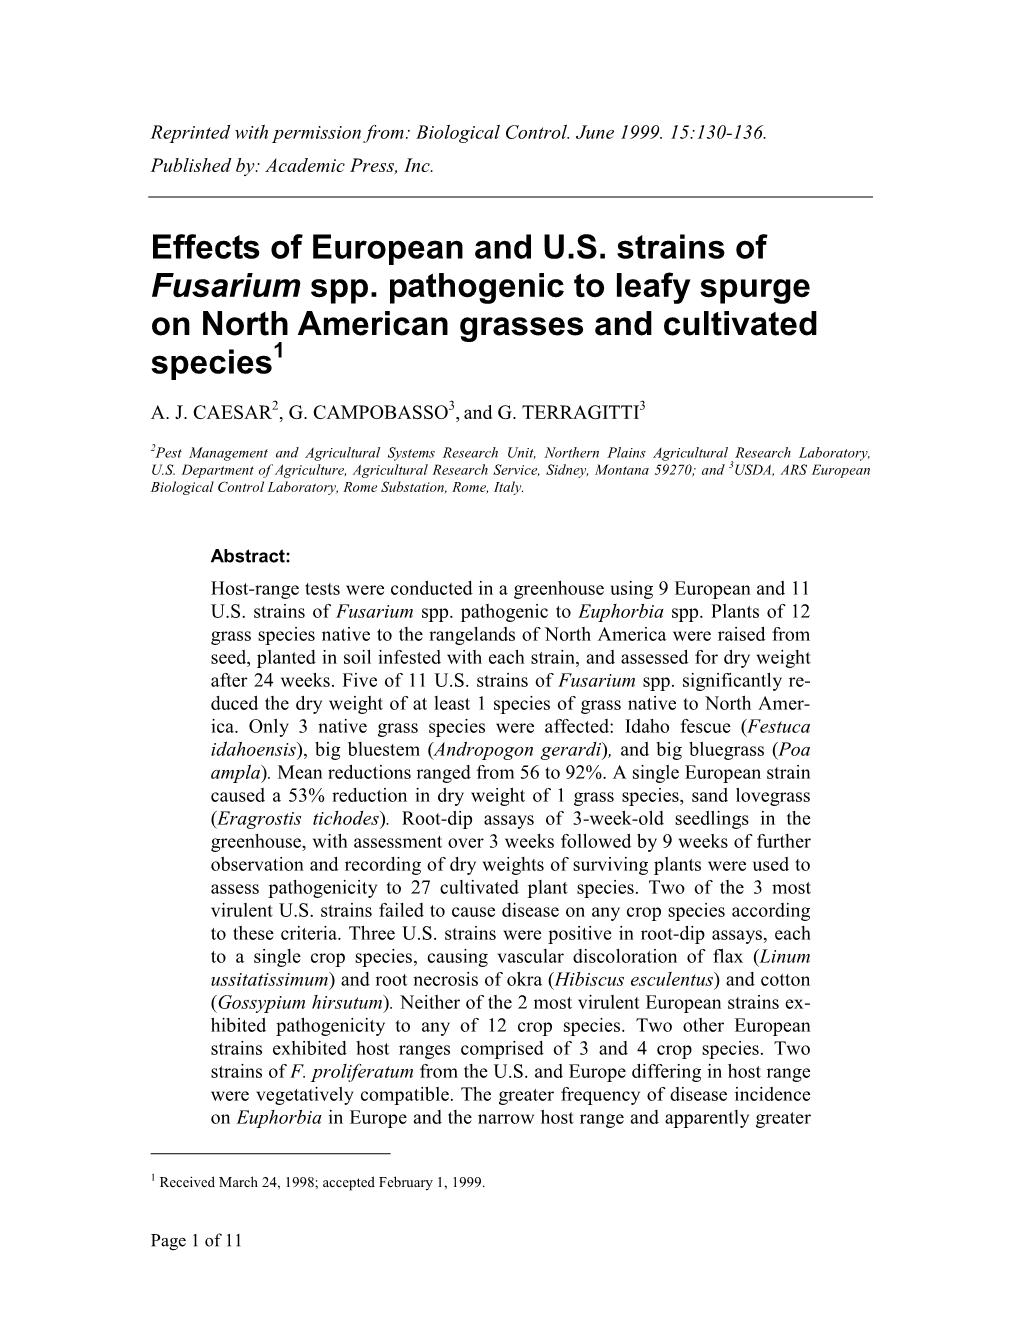 Effects of European and U.S. Strains of Fusarium Spp. Pathogenic to Leafy Spurge on North American Grasses and Cultivated Species1